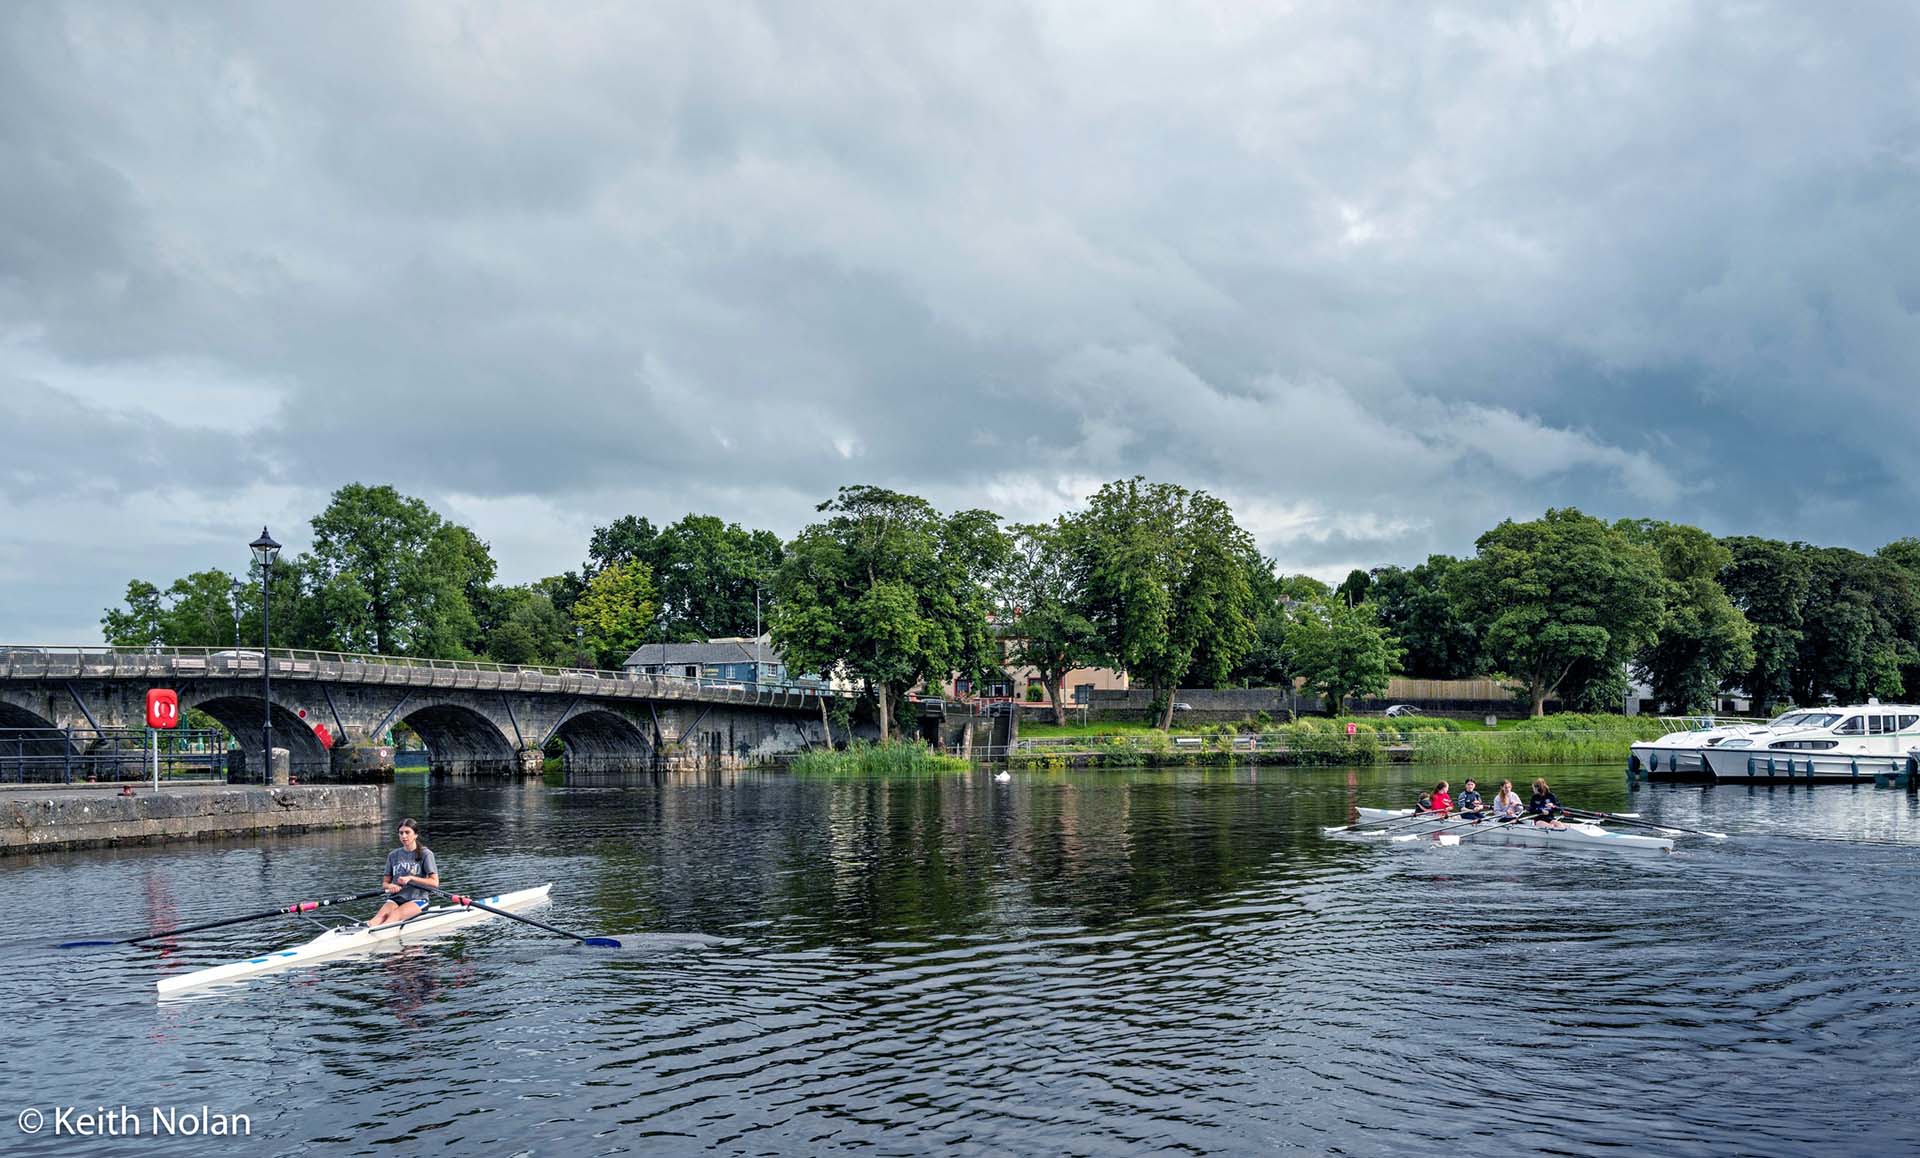 Rowing boats. Photo by Keith Nolan.